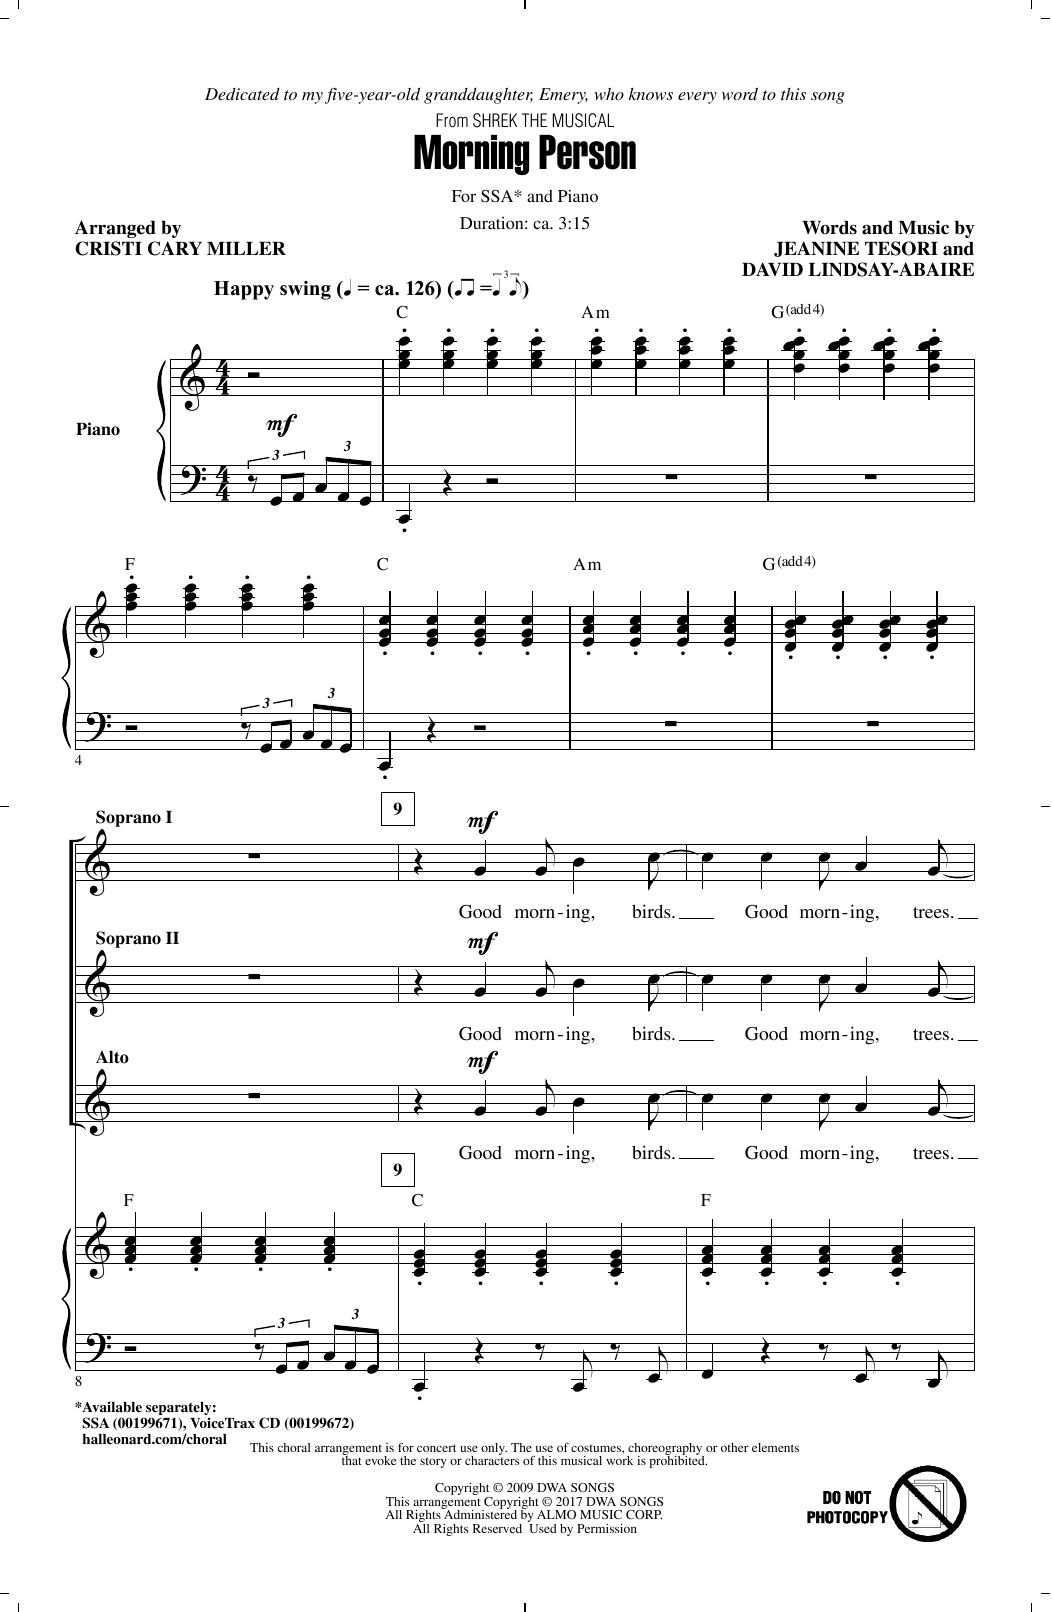 Download Cristi Cary Miller Morning Person Sheet Music